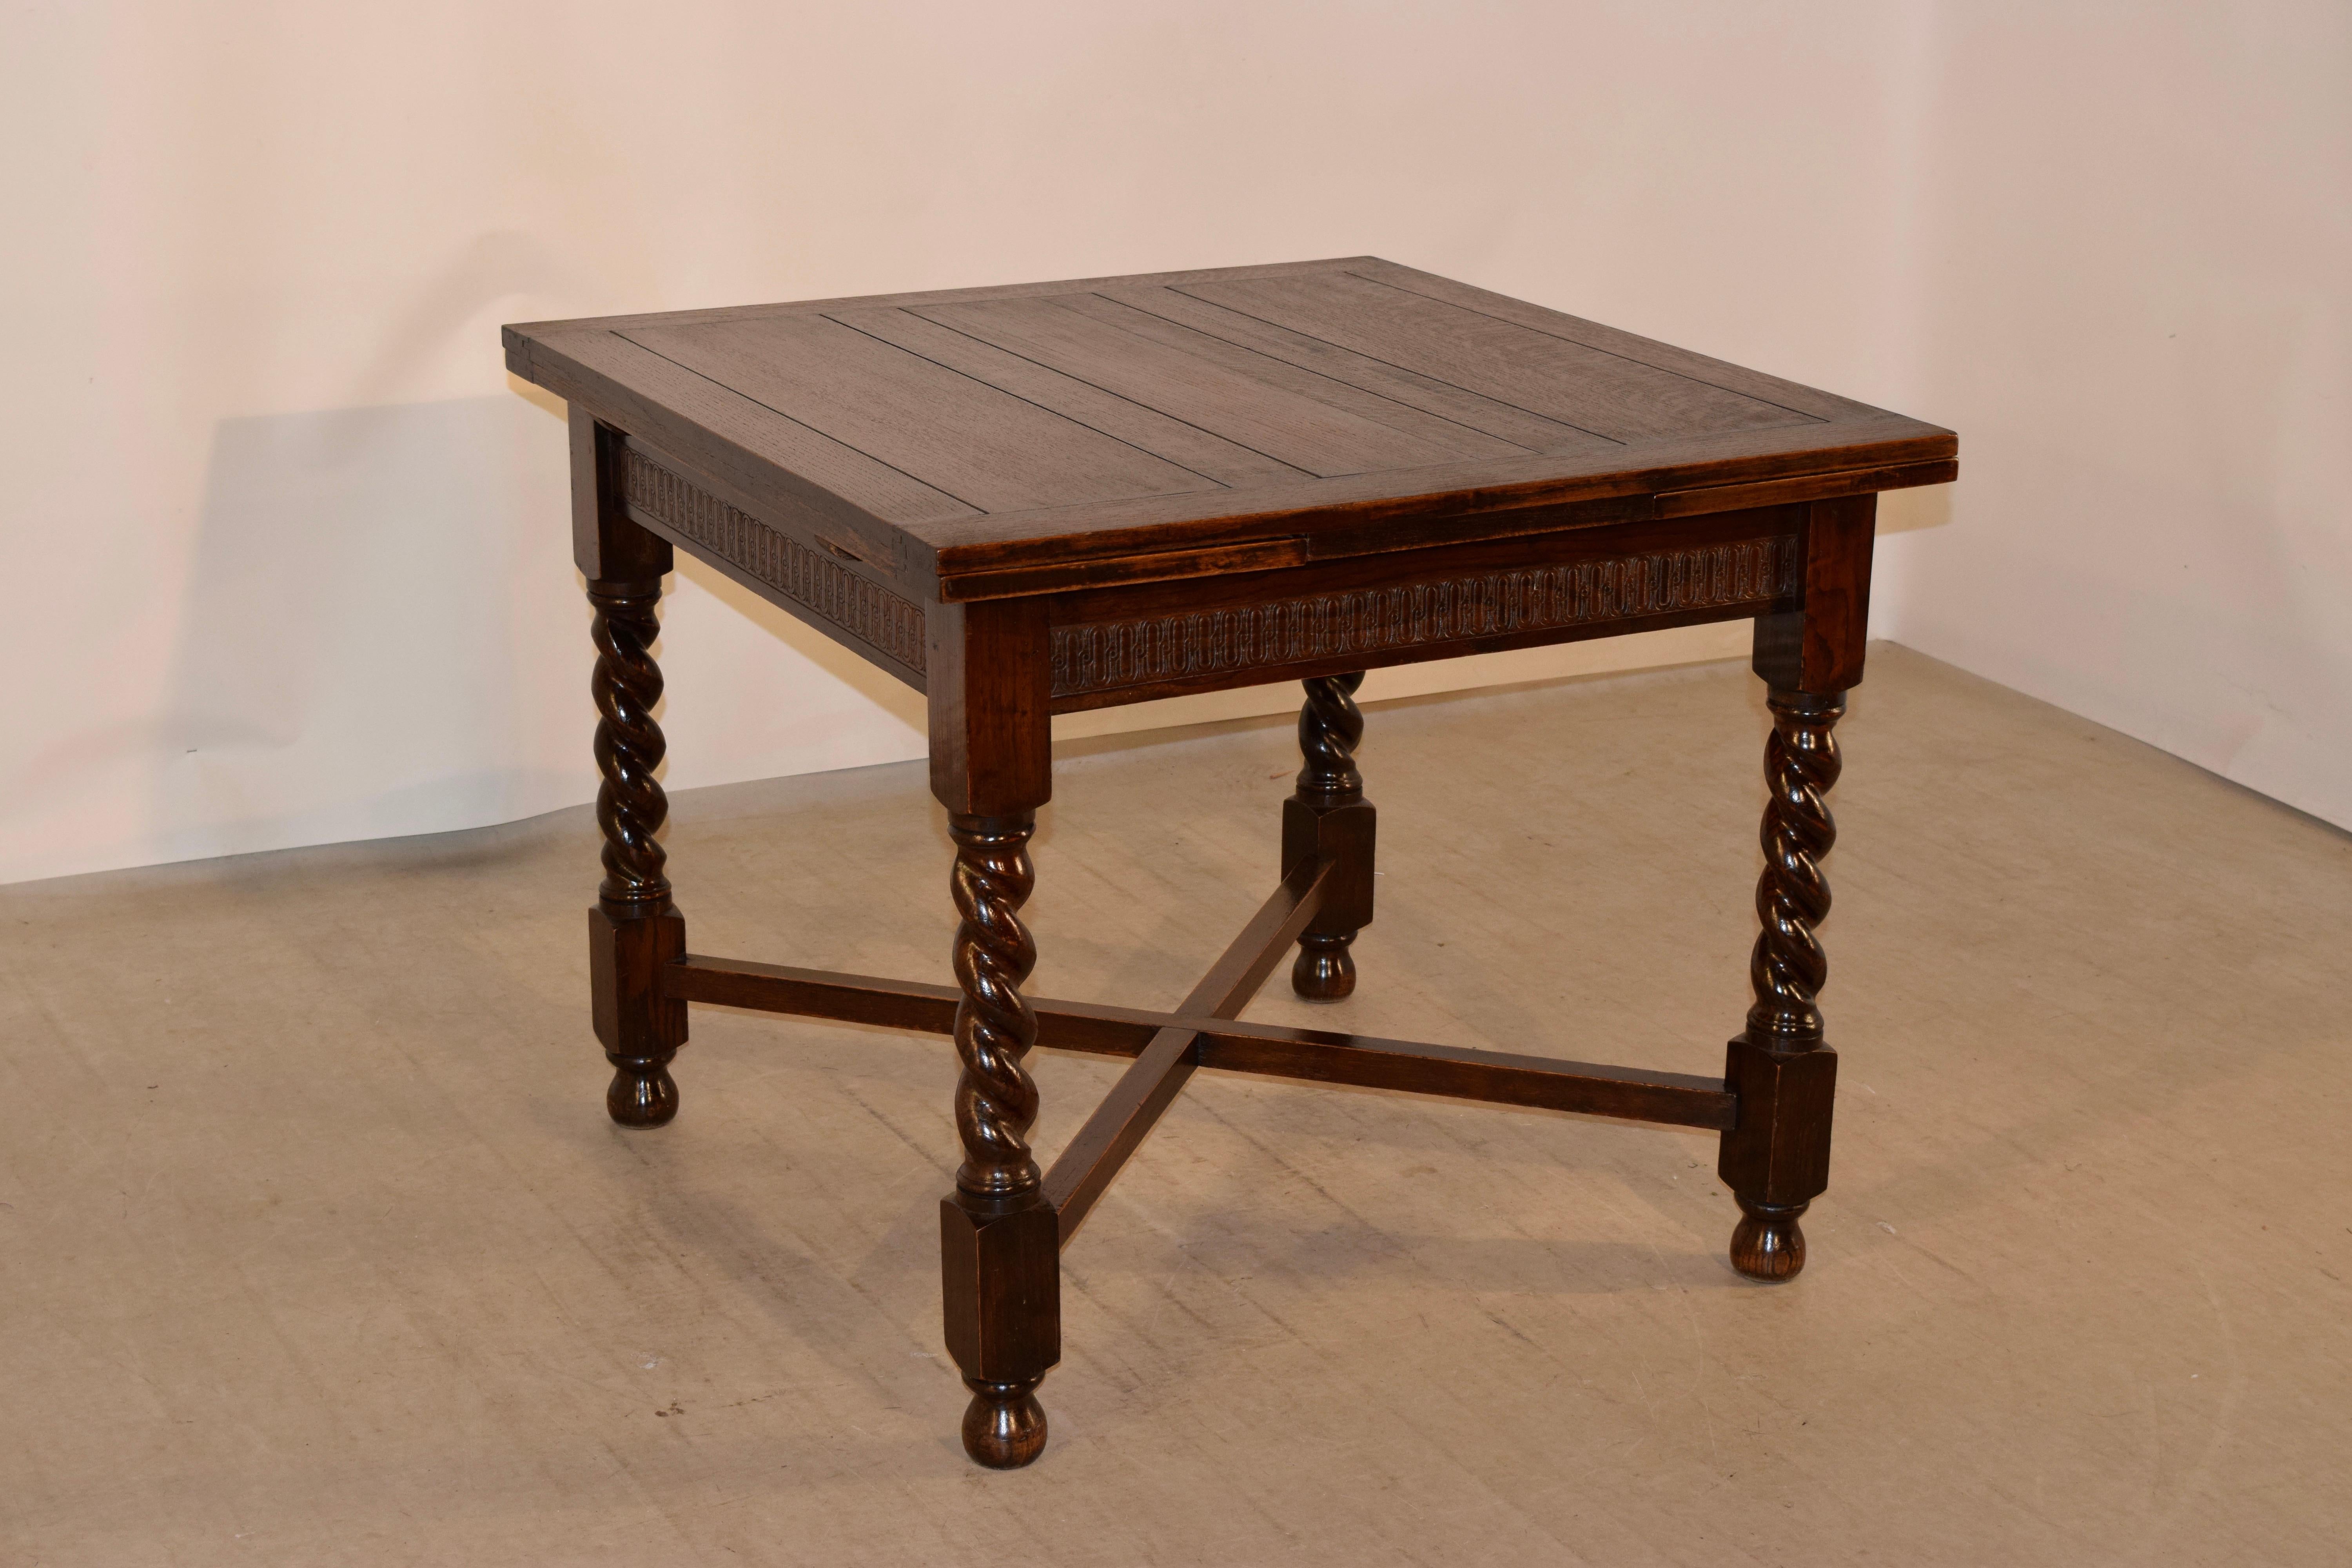 Late 19th century oak draw leaf table from England with a paneled top and leaves, following down to a hand carved decorated apron and supported on hand turned barley twist legs joined by cross stretchers and raised on bun feet. The apron measures 24